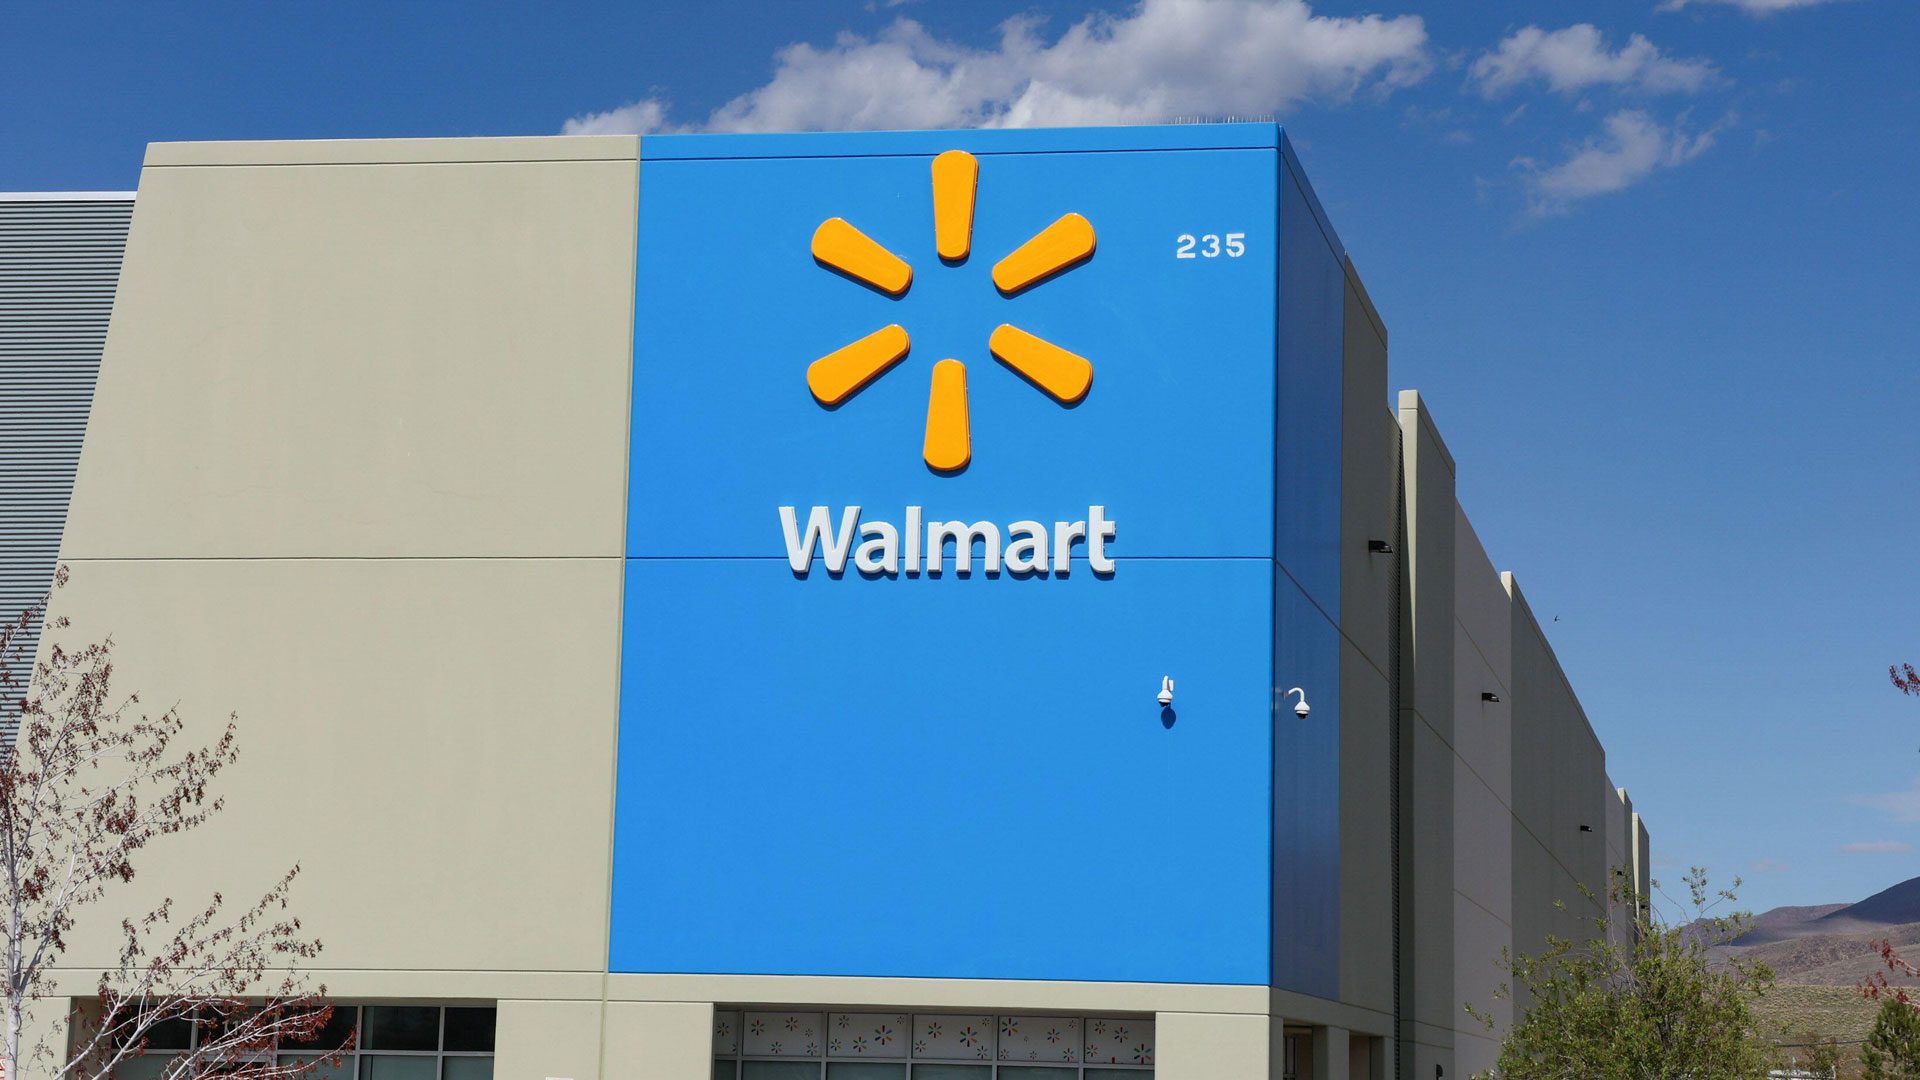 Walmart makes more cuts after closure of 8 locations & ‘automation’ announcement [Video]